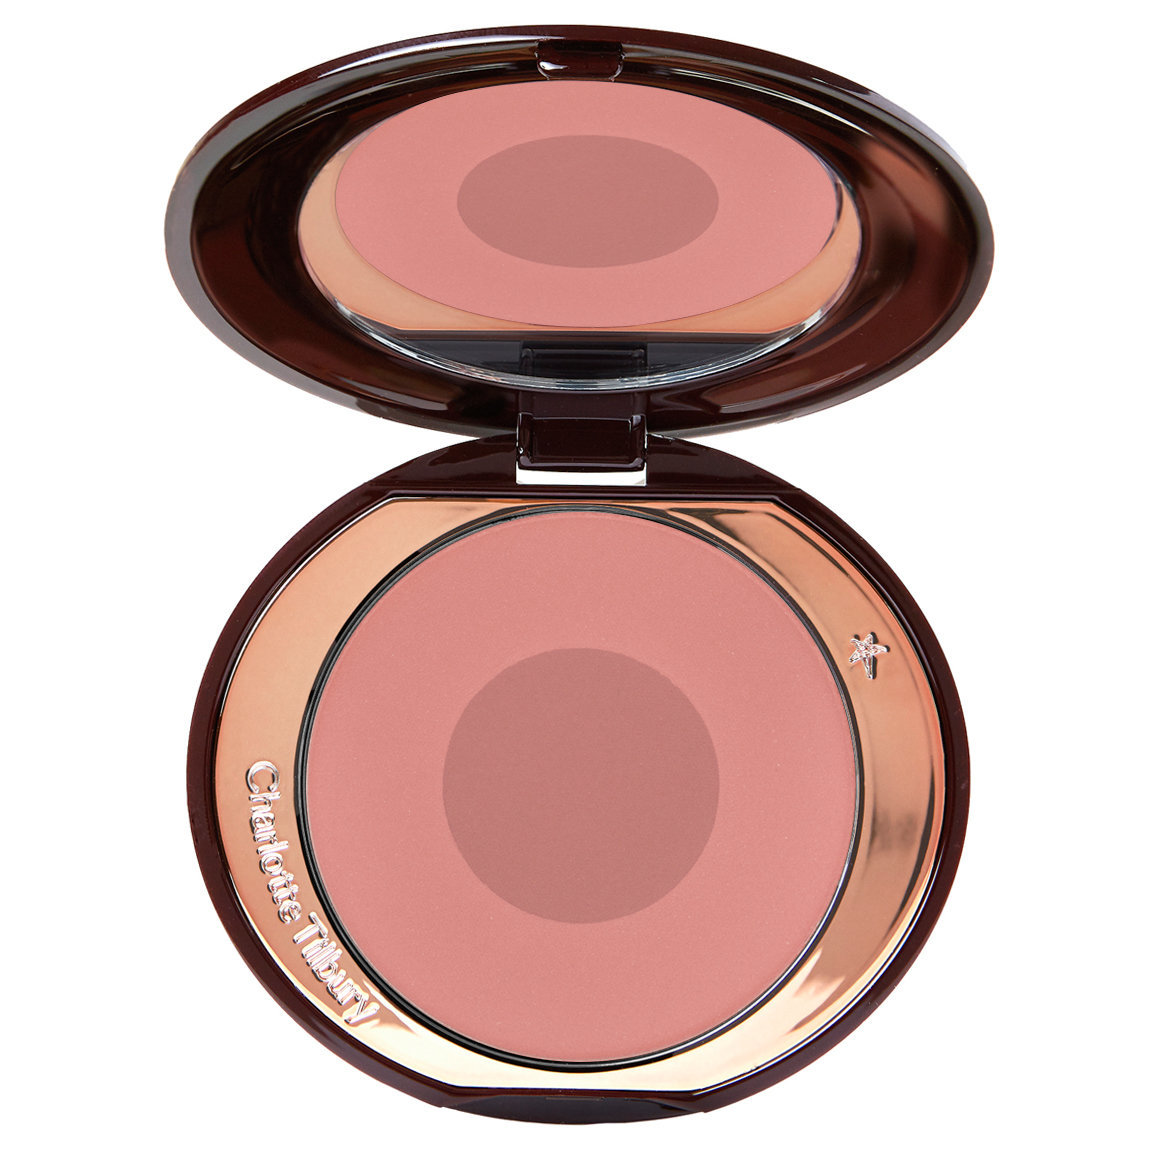 Charlotte Tilbury Cheek To Chic Sex On Fire alternative view 1 - product swatch.